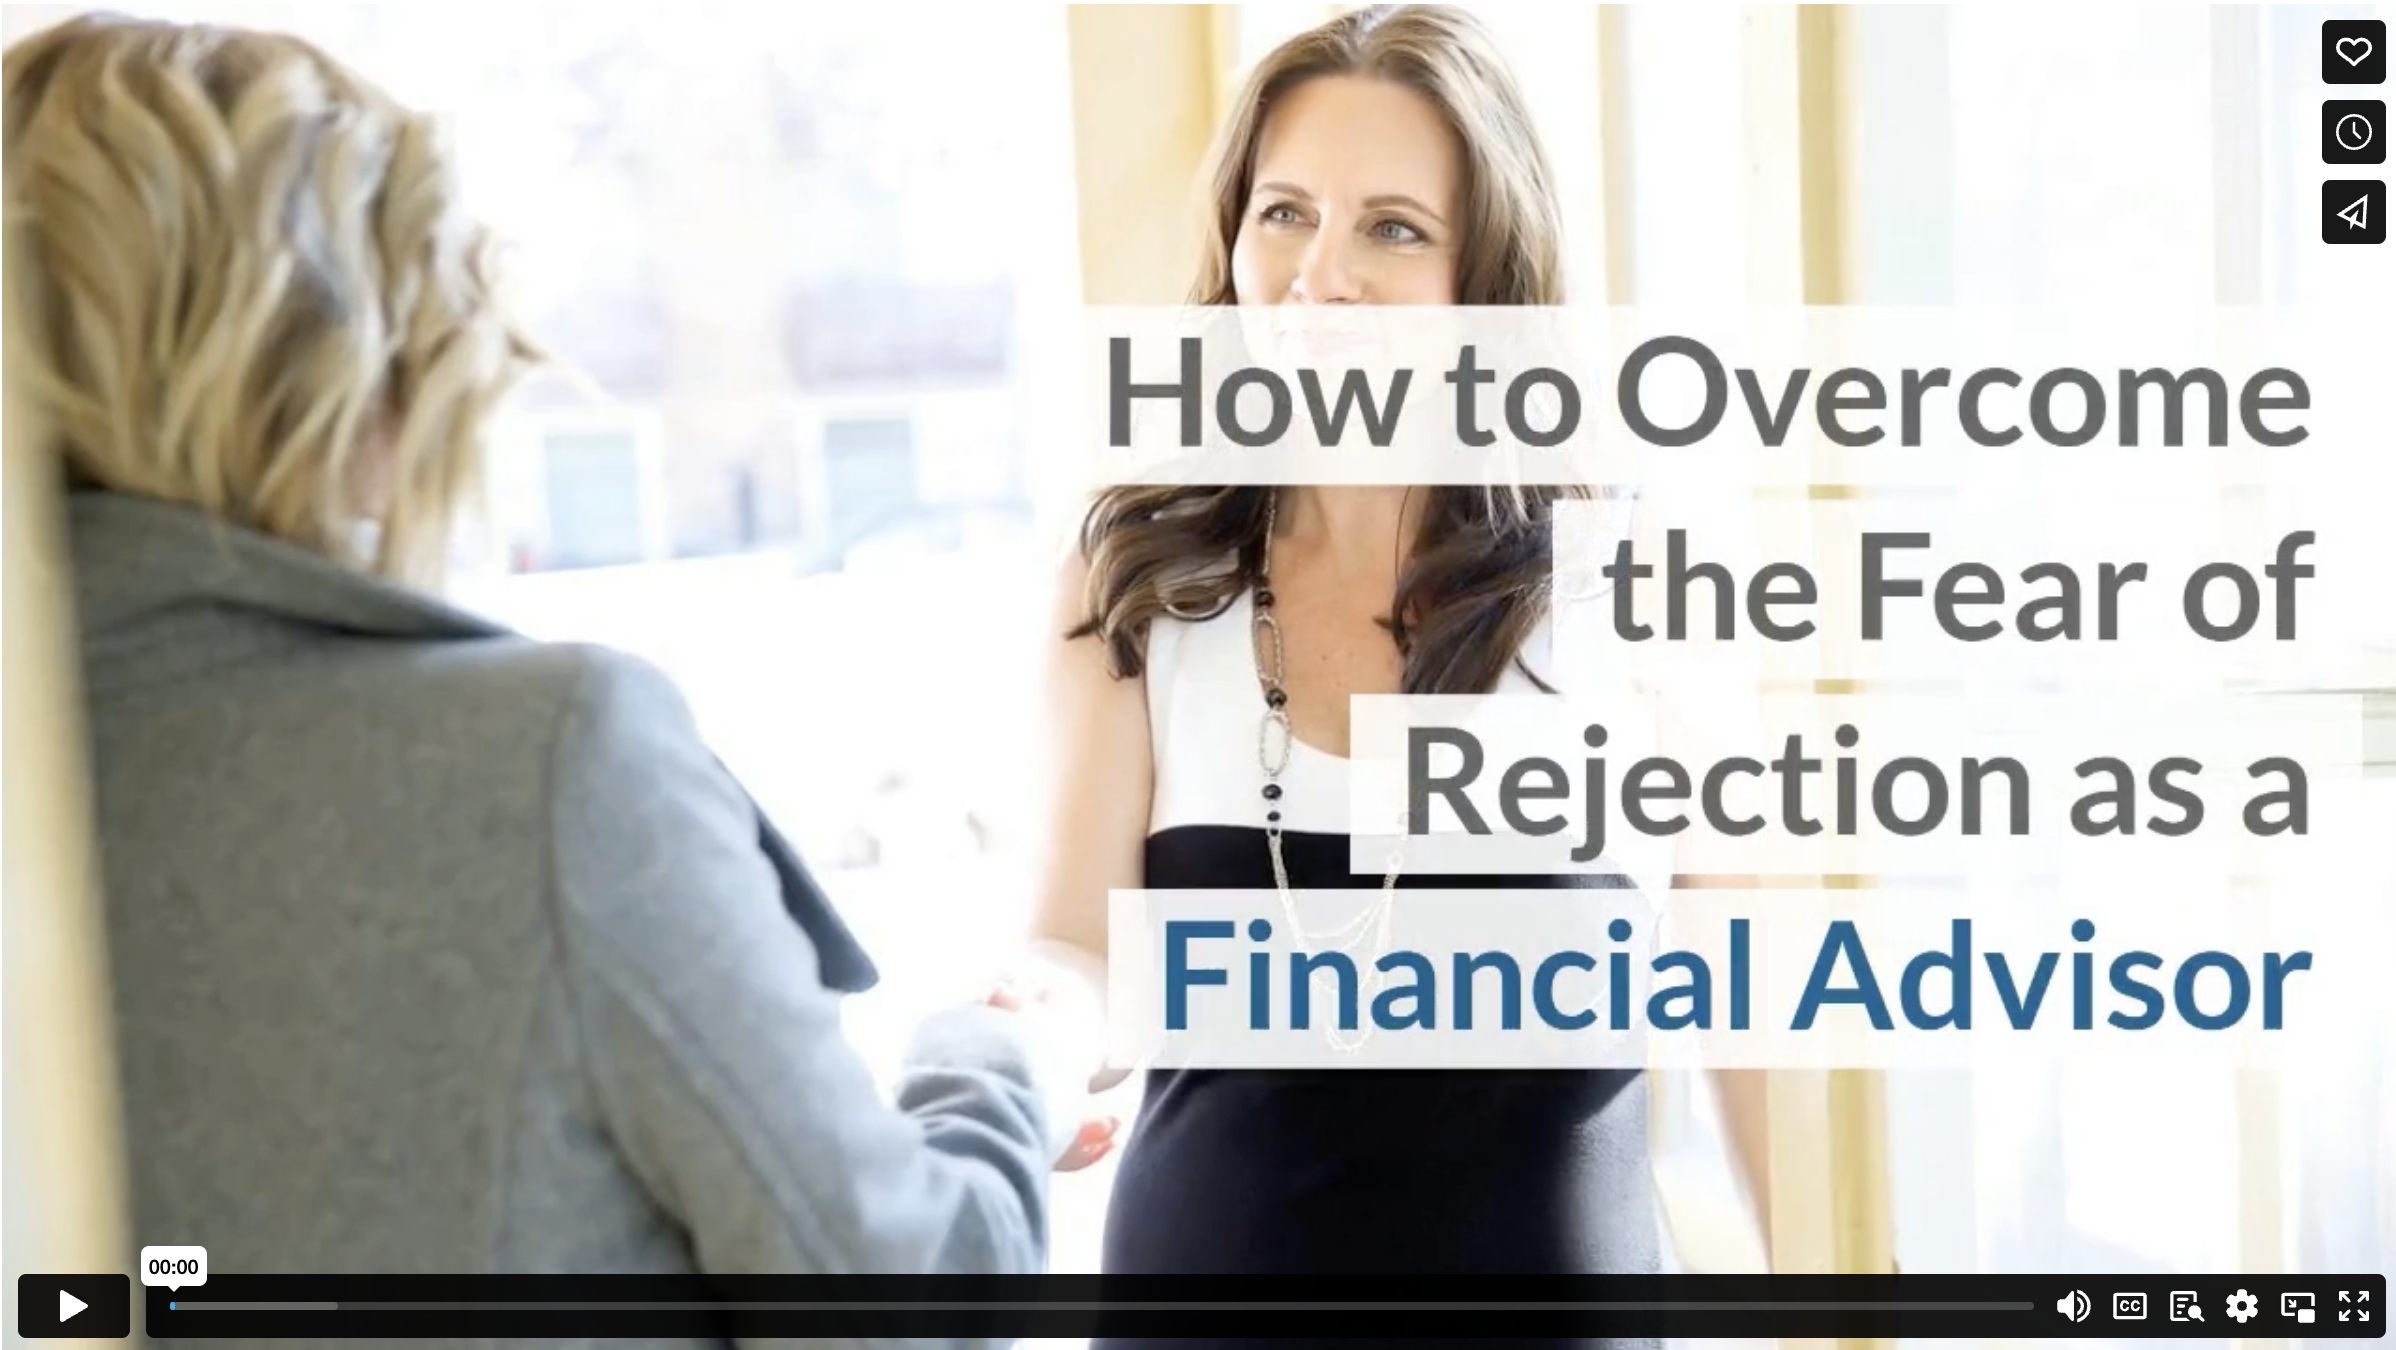 How to Overcome the Fear of Rejection as a Financial Advisor